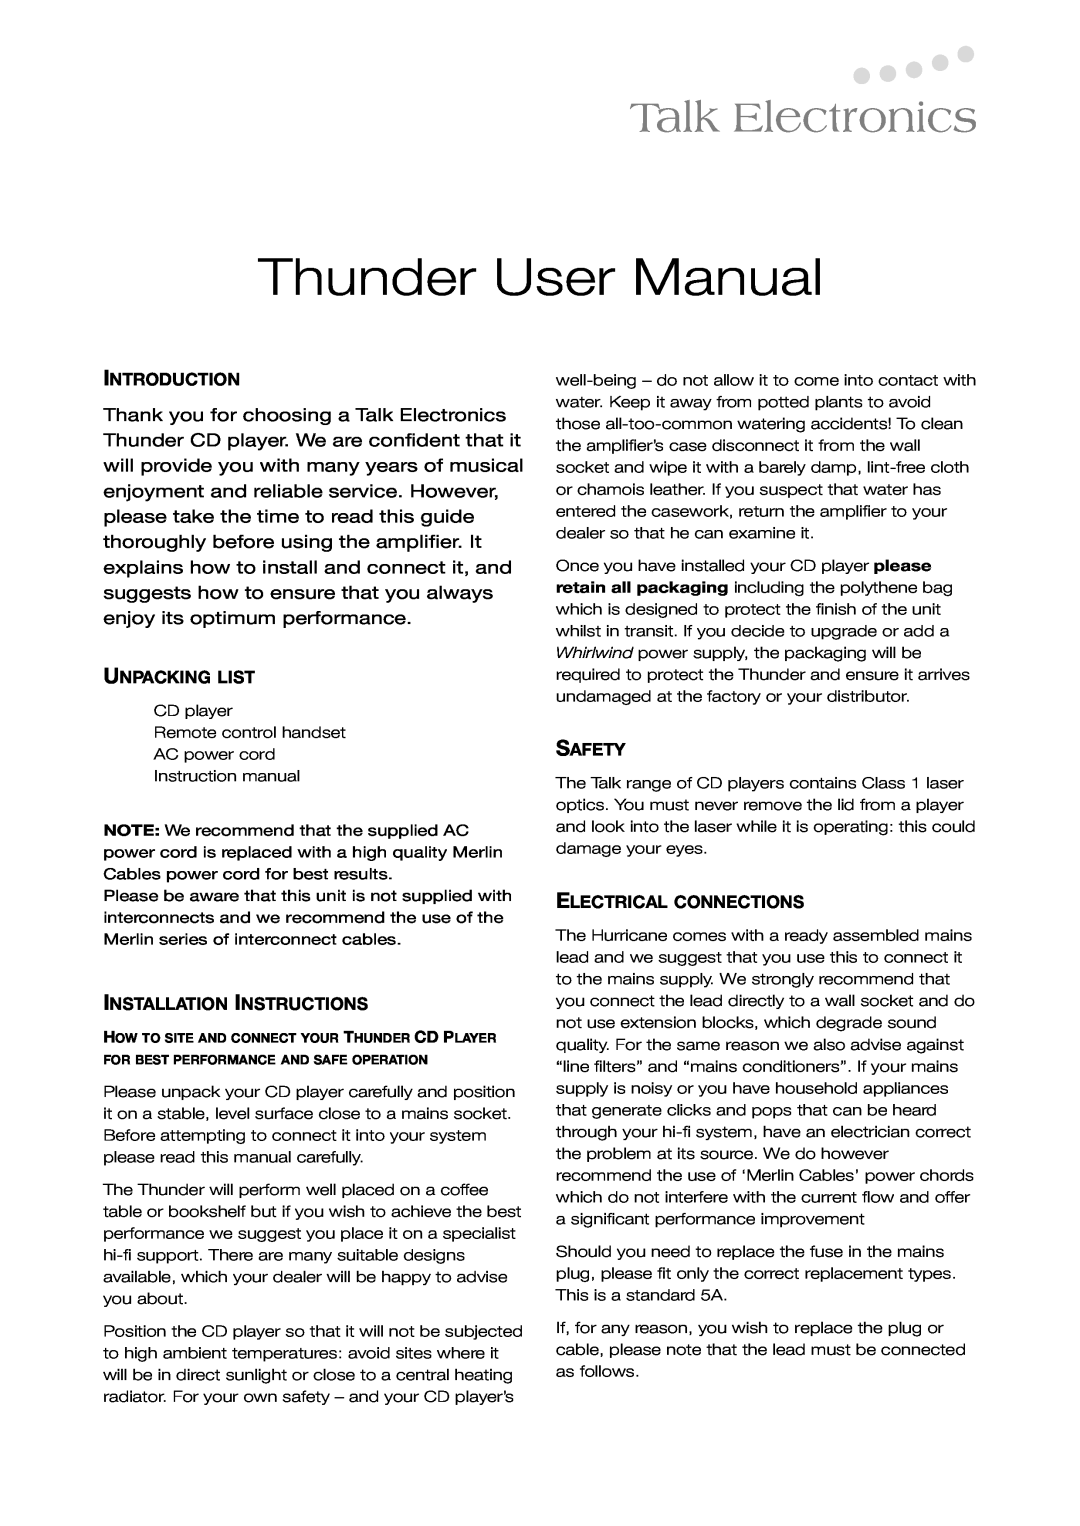 Talk electronic 2.2, Thunder 1.2 Introduction, Unpacking List, Installation Instructions, Safety, Electrical Connections 